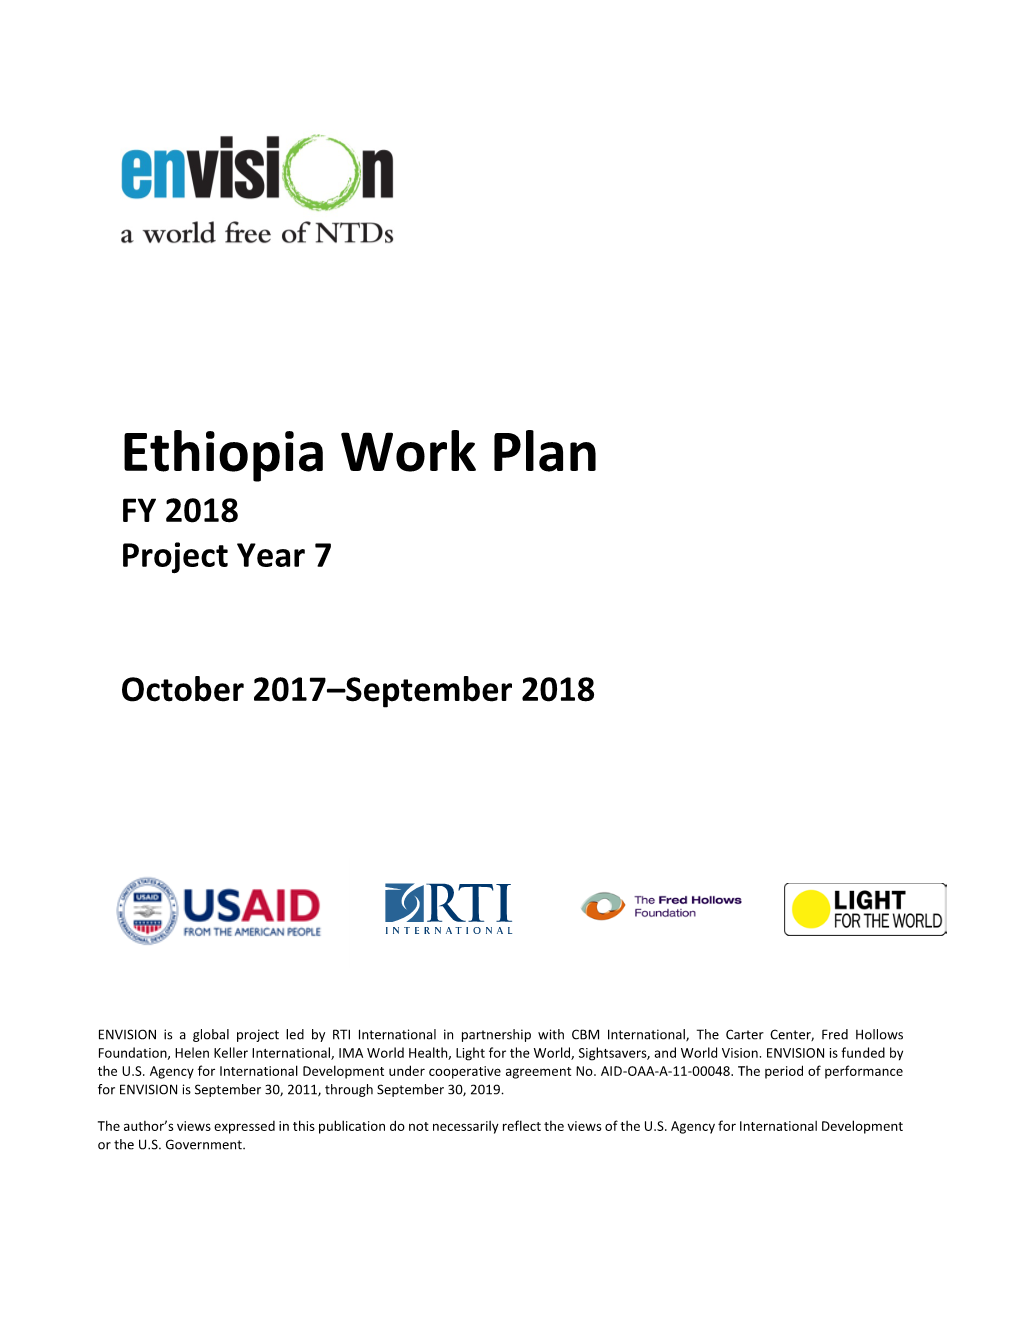 Ethiopia Work Plan FY 2018 Project Year 7